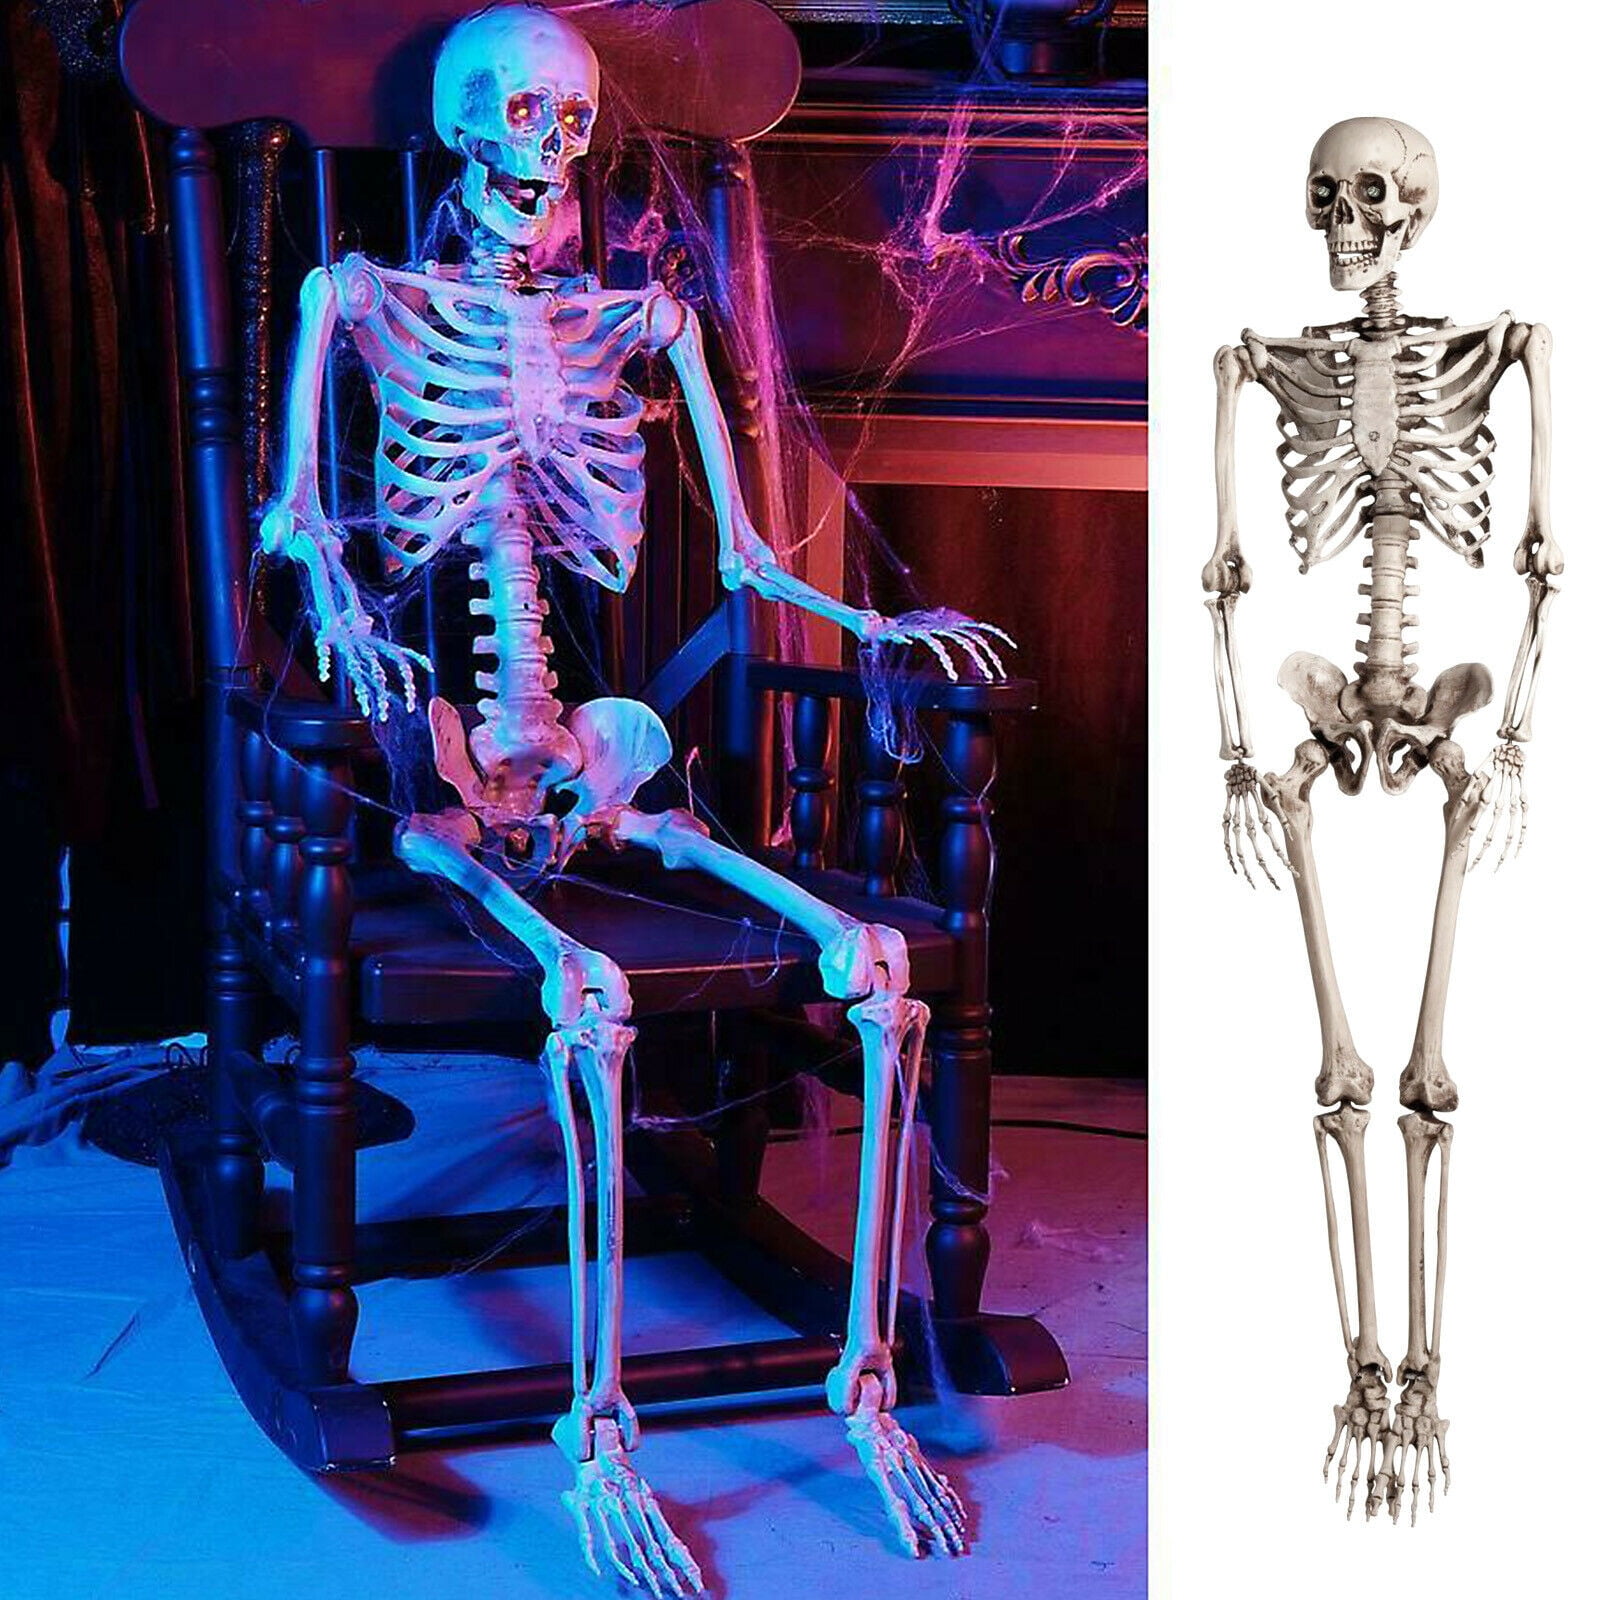 ODOMY 165cm Halloween Life Size Skeleton Poseable Decoration Full Body Bones Prop Hanging Human Skull Ornament Model For Anatomical Learning Aid Art Shooting Halloween Graveyard Cosplay Party